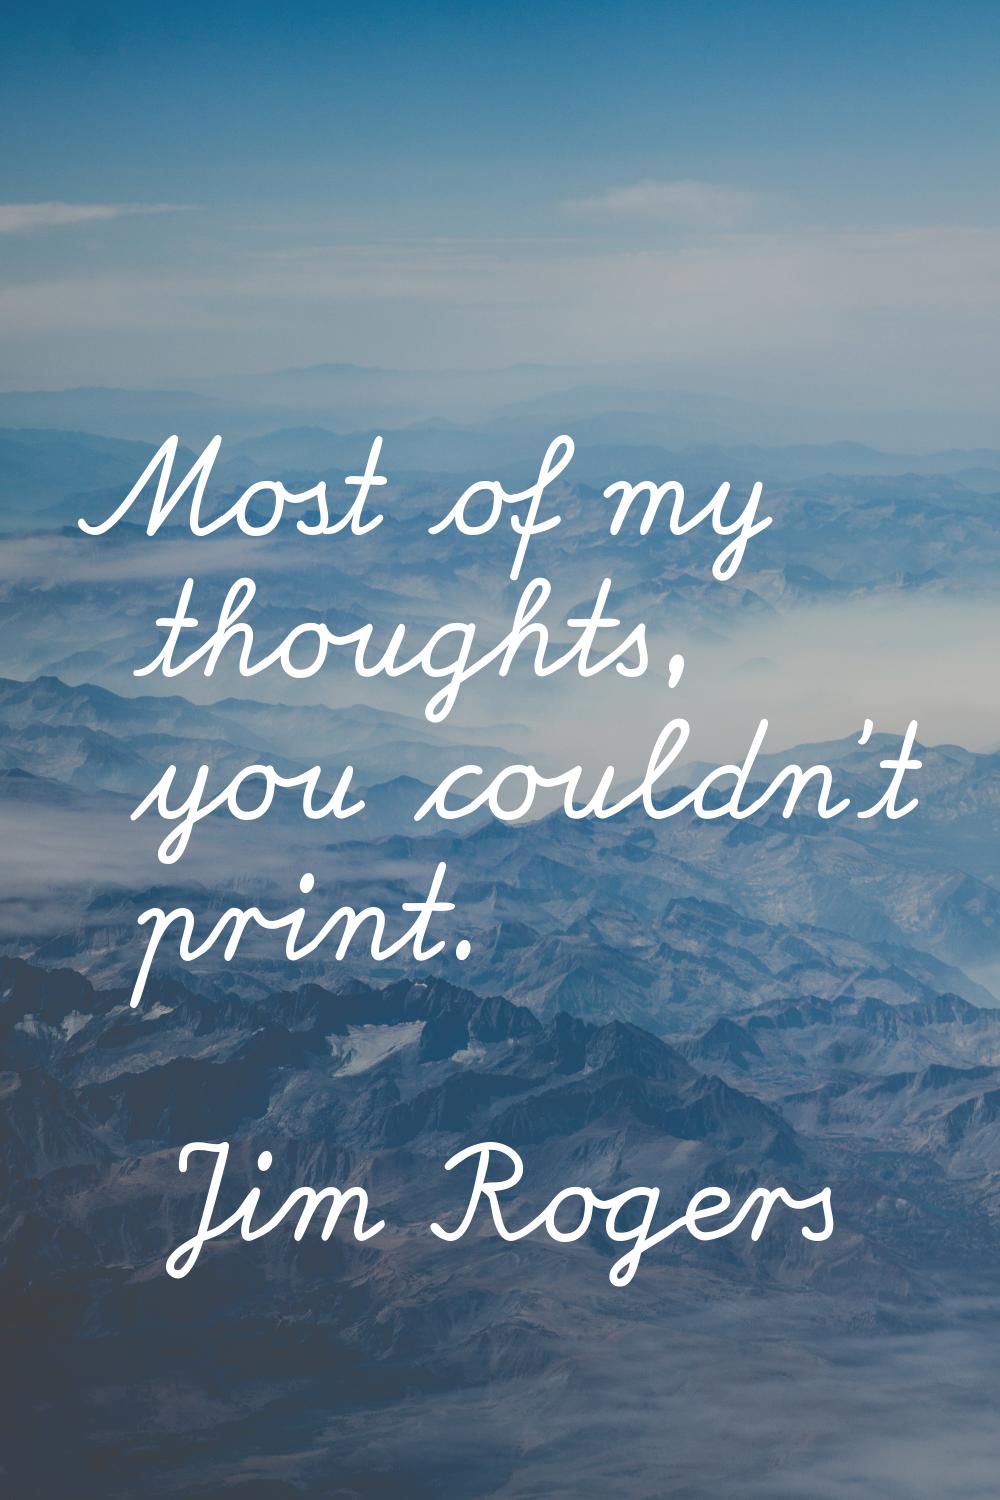 Most of my thoughts, you couldn't print.